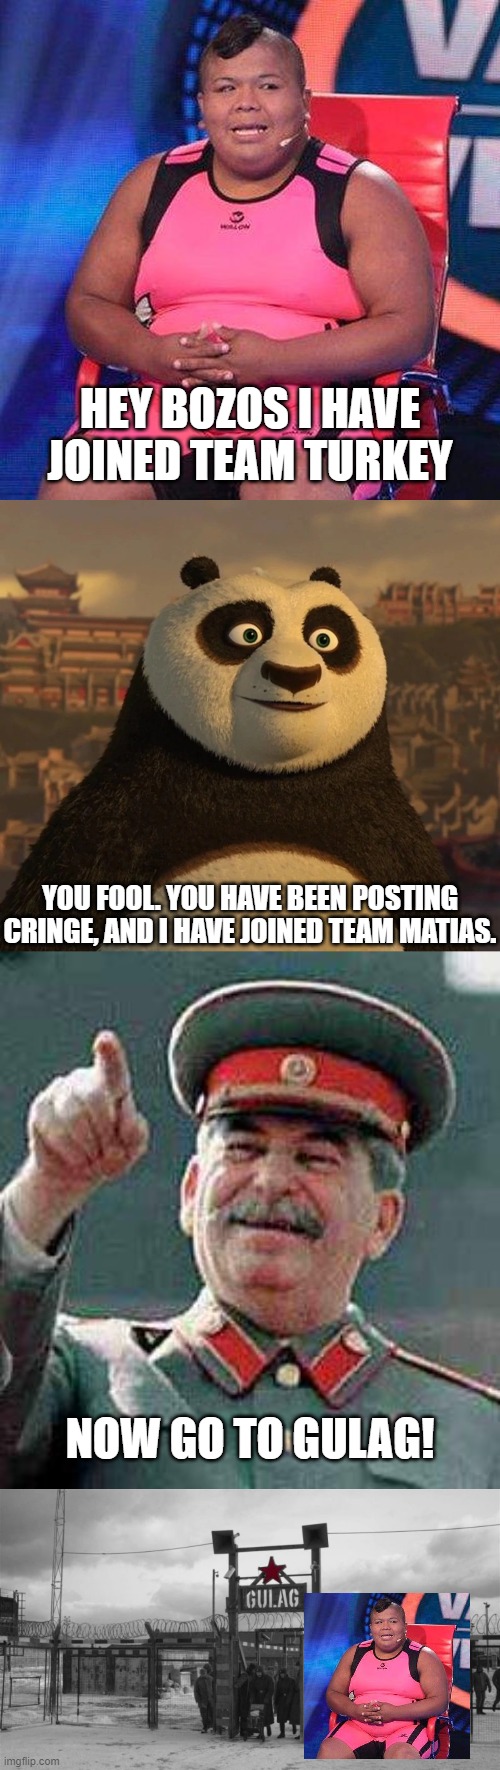 HEY BOZOS I HAVE JOINED TEAM TURKEY; YOU FOOL. YOU HAVE BEEN POSTING CRINGE, AND I HAVE JOINED TEAM MATIAS. NOW GO TO GULAG! | image tagged in stalin says,gulag | made w/ Imgflip meme maker